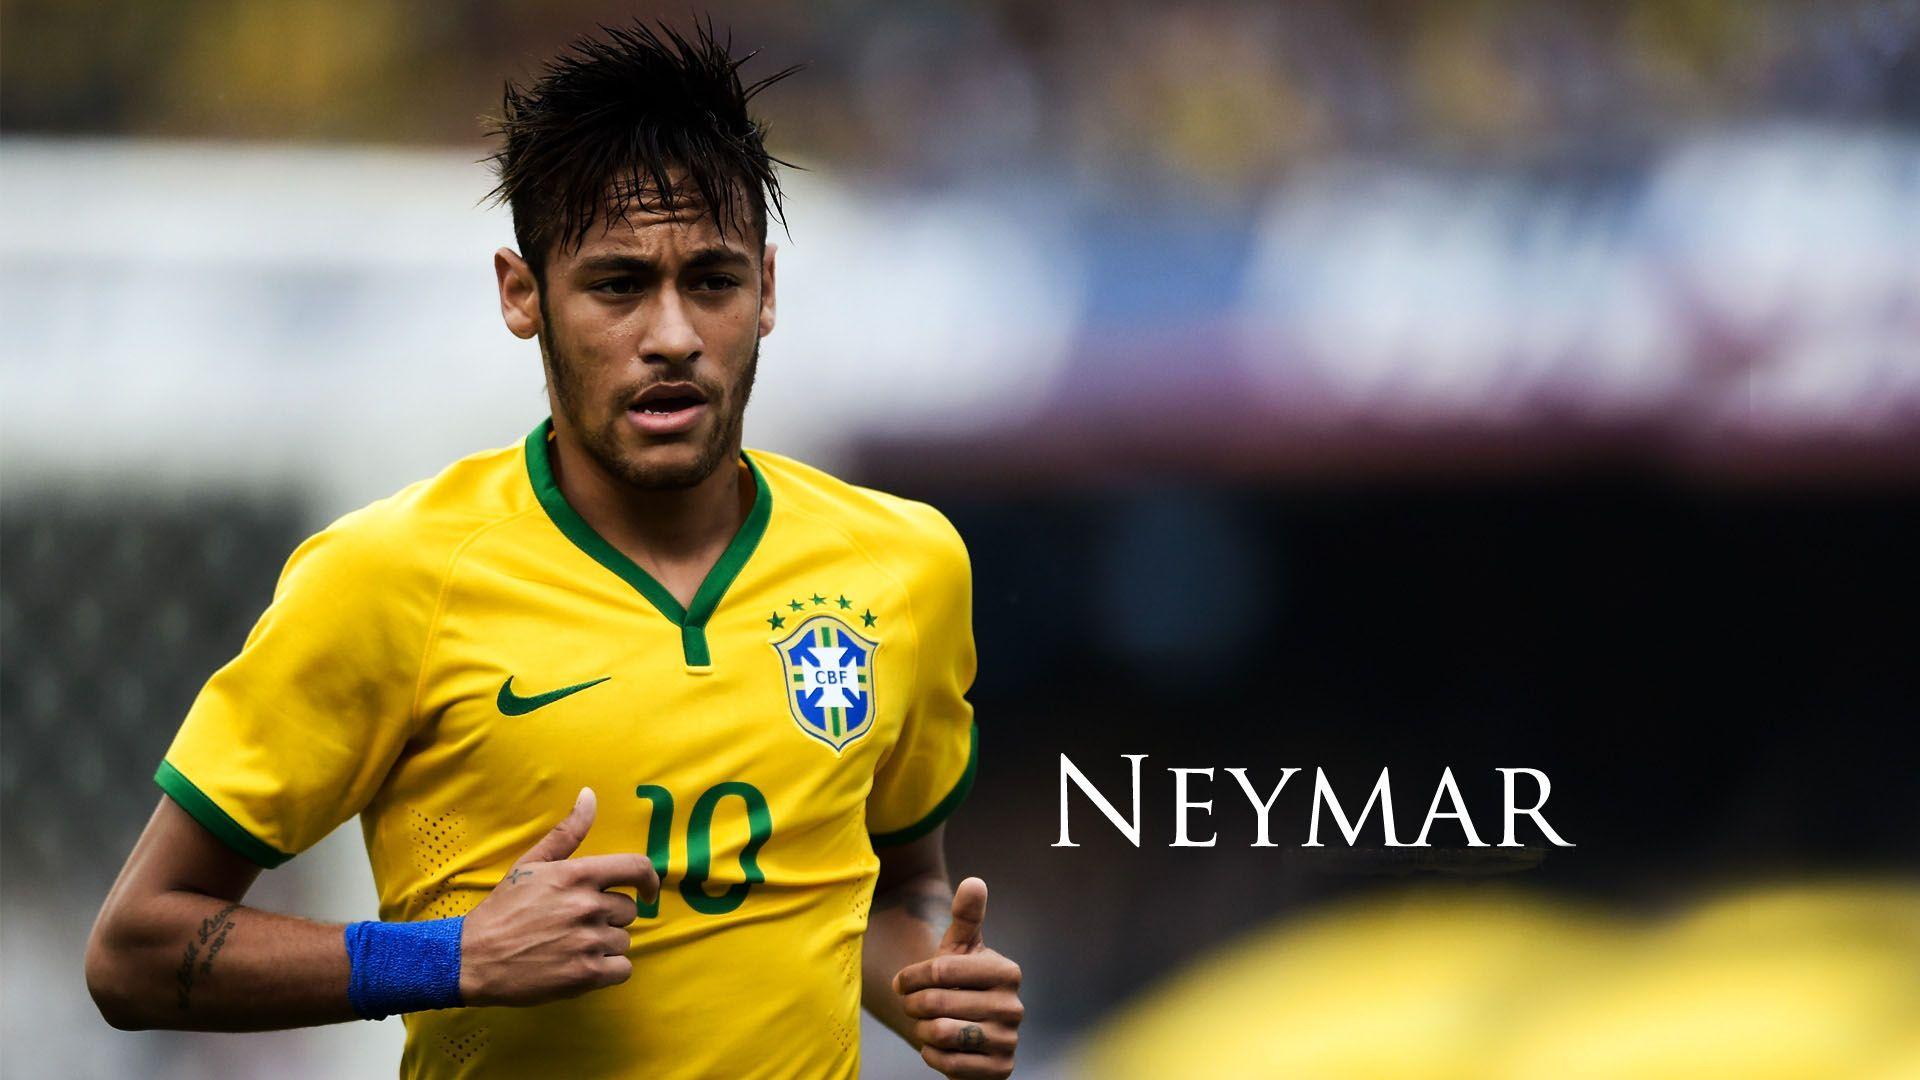 Neymar To Play For Kaizer Chiefs FC In South Africa